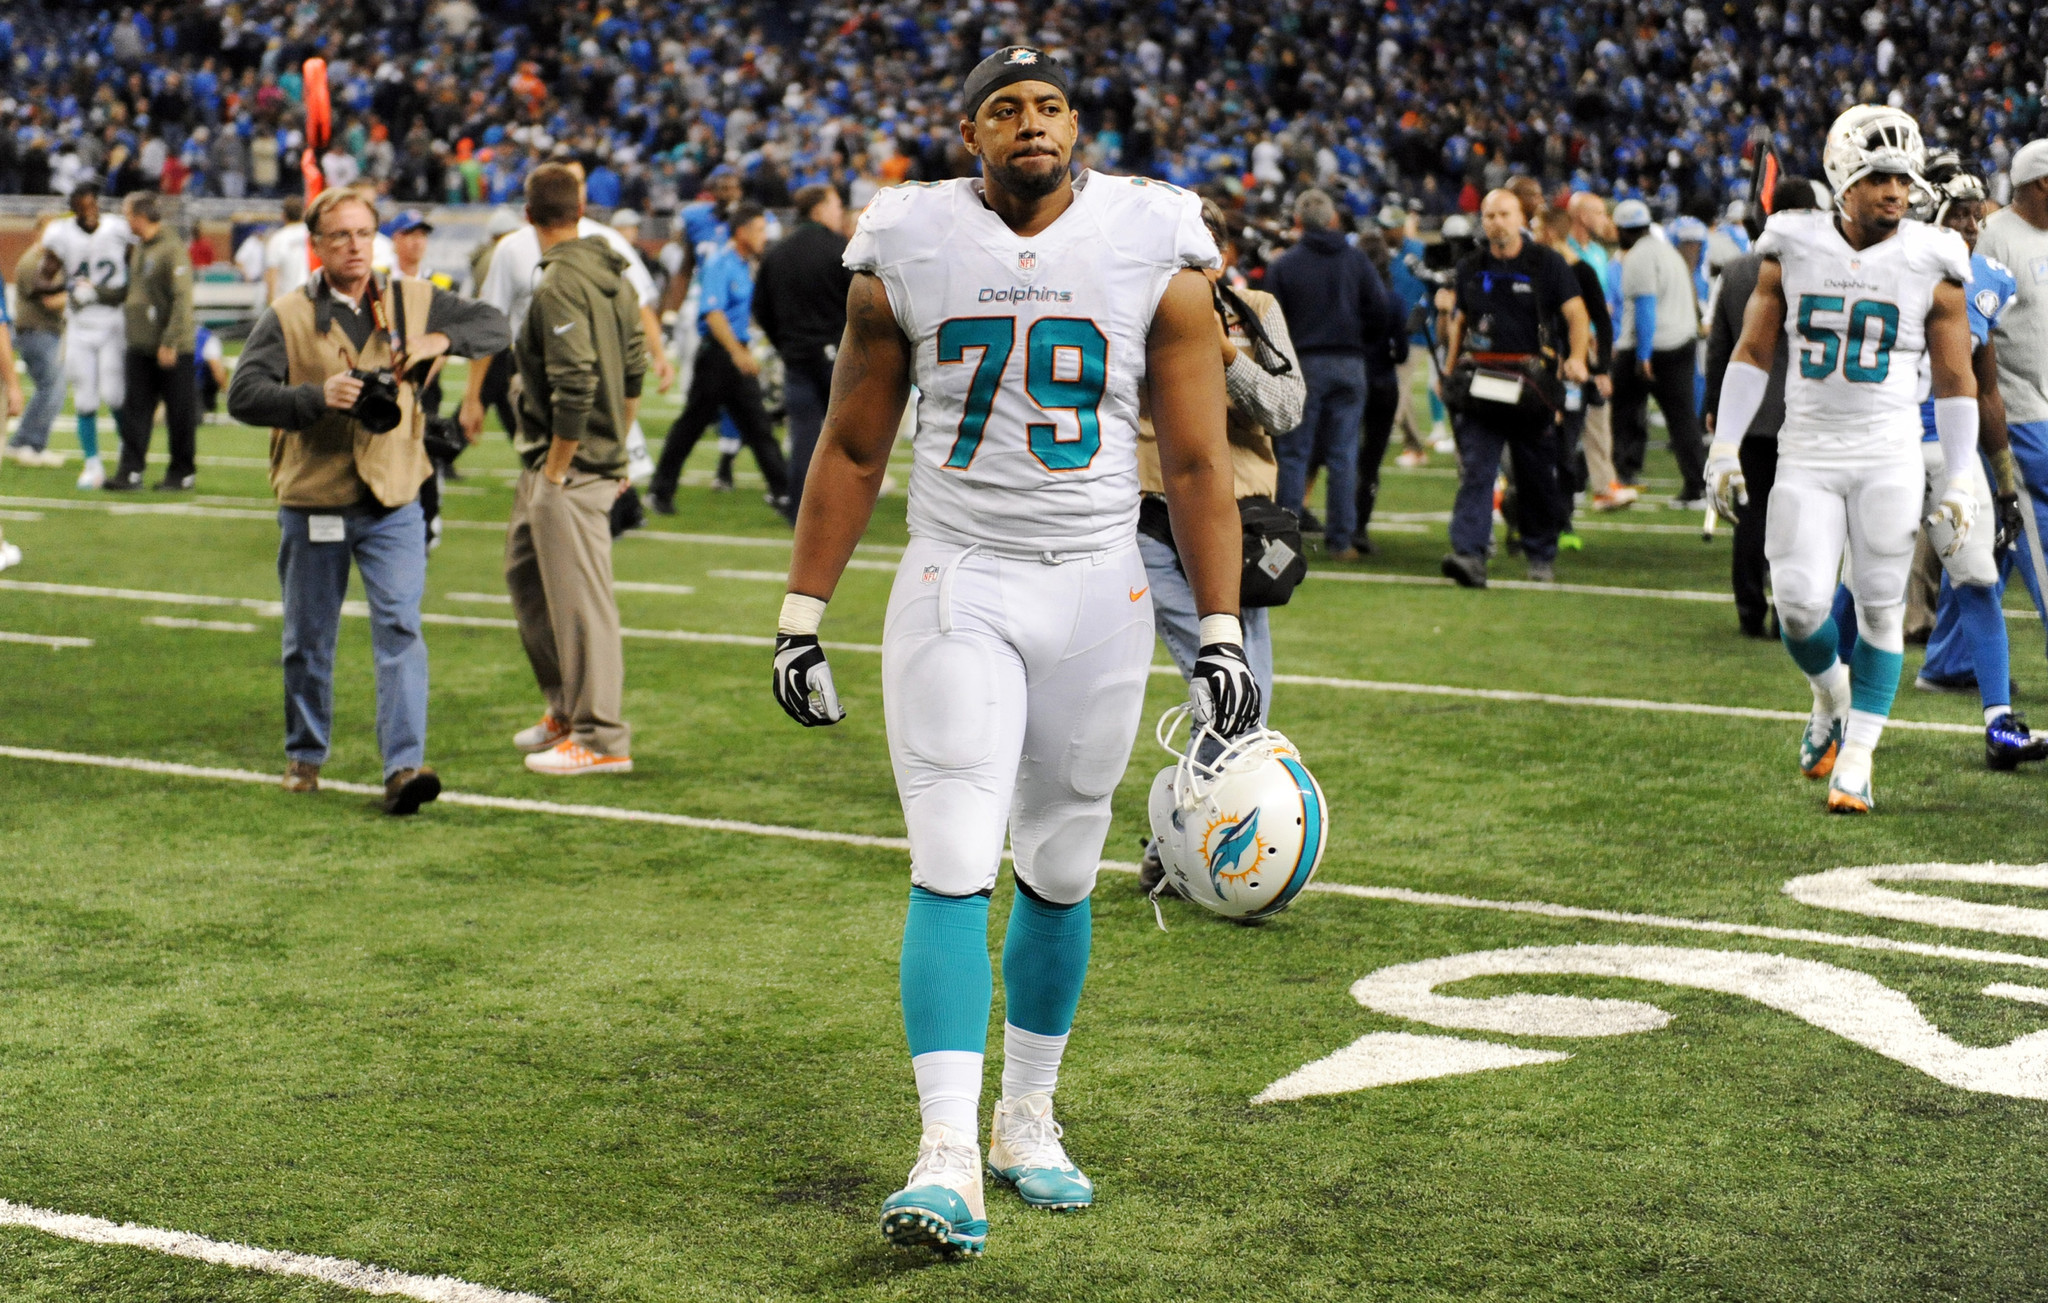 sfl-derrick-shelby-signs-his-tender-with-dolphins-returns-for-another-season-20150326